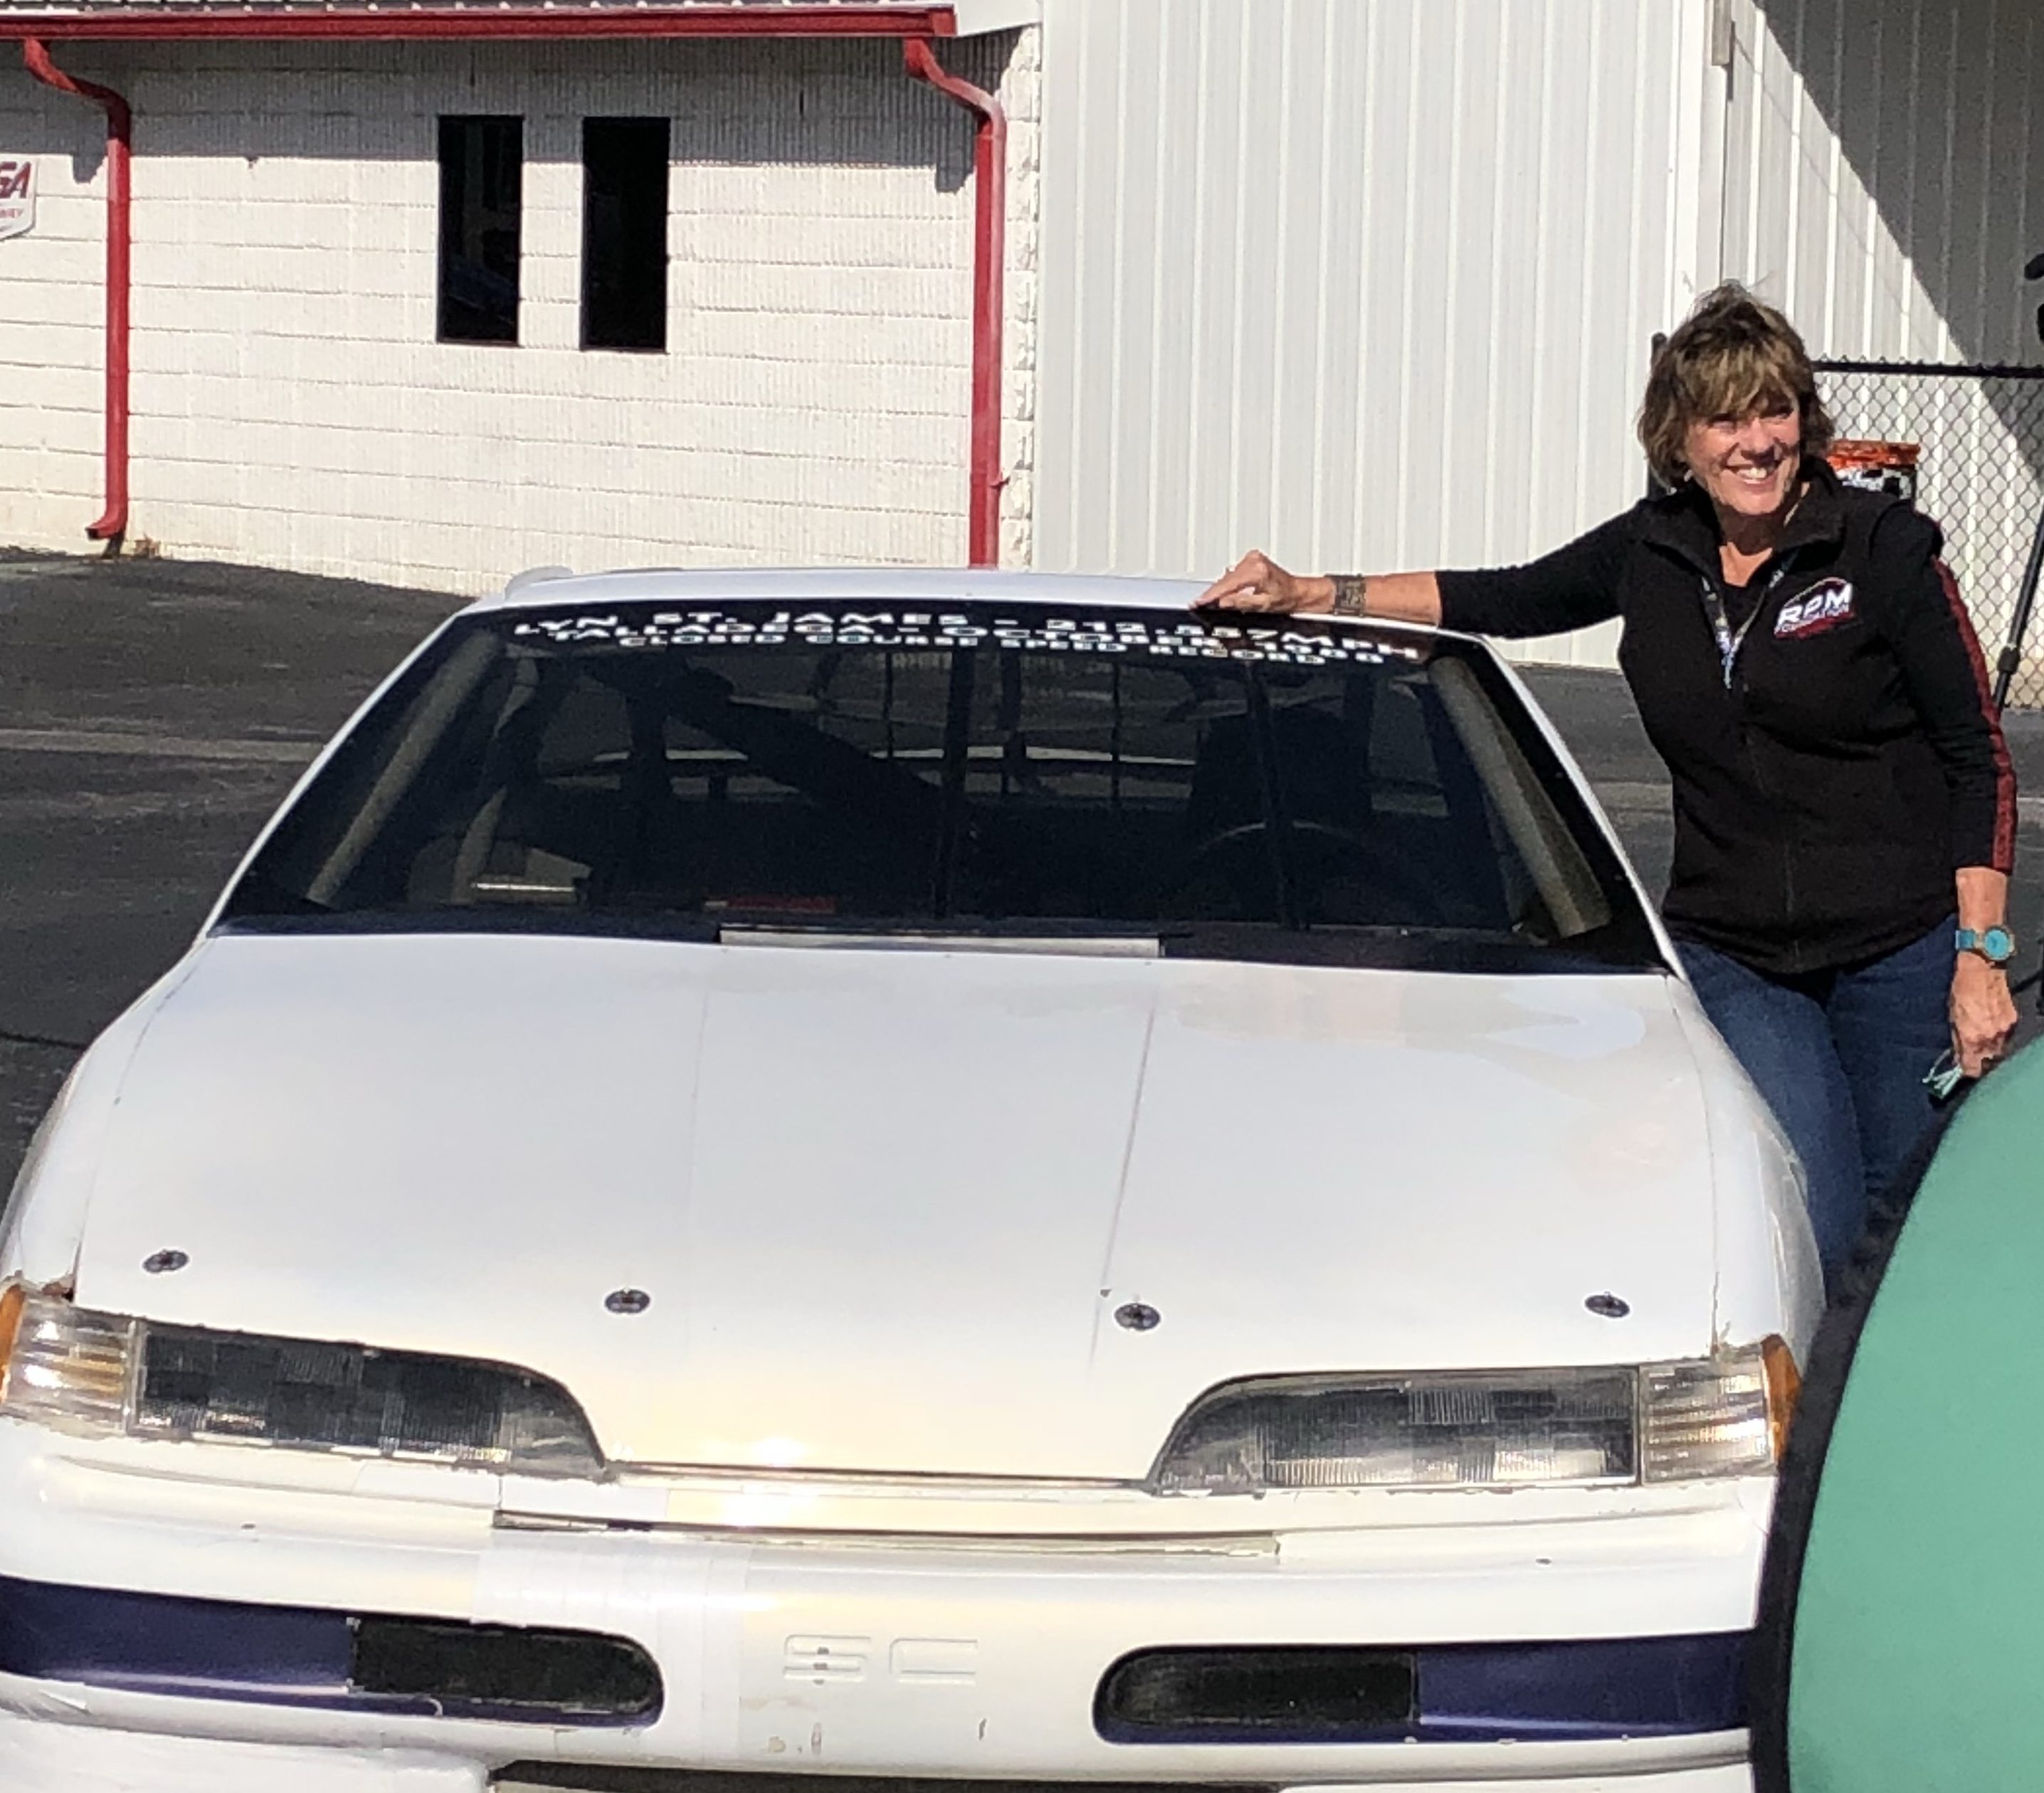 Storied female legacy, record holder, Lyn St. James,  celebrates 30 years at Talladega Superspeedway